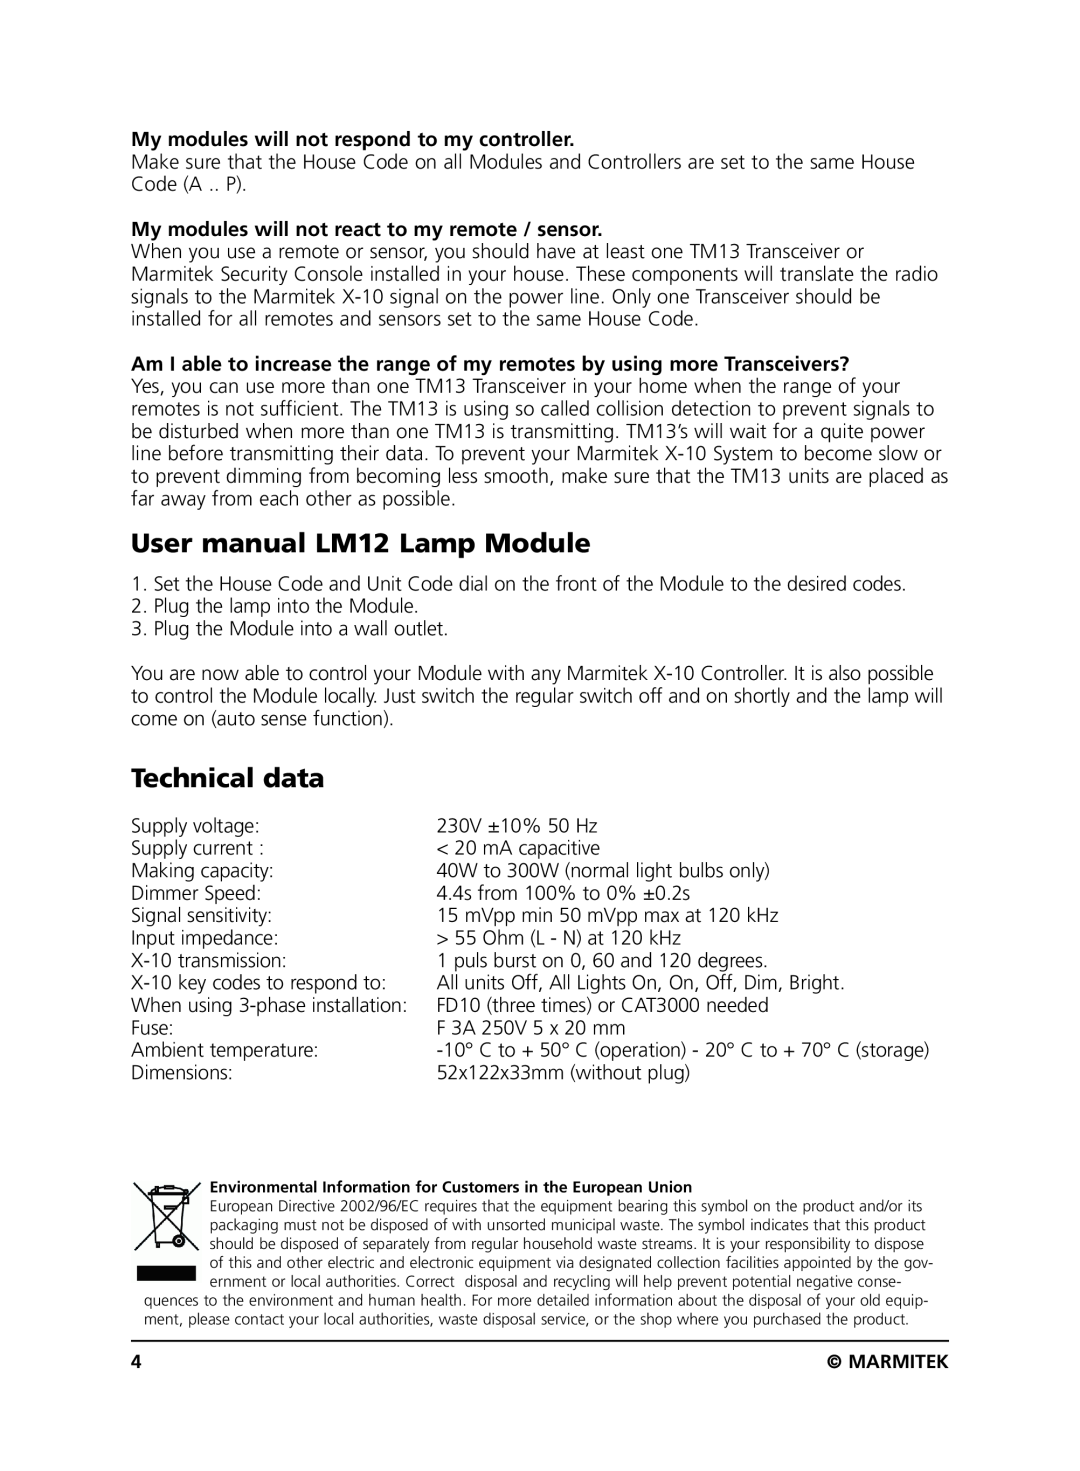 Marmitek LM12 user manual Technical data, My modules will not respond to my controller 